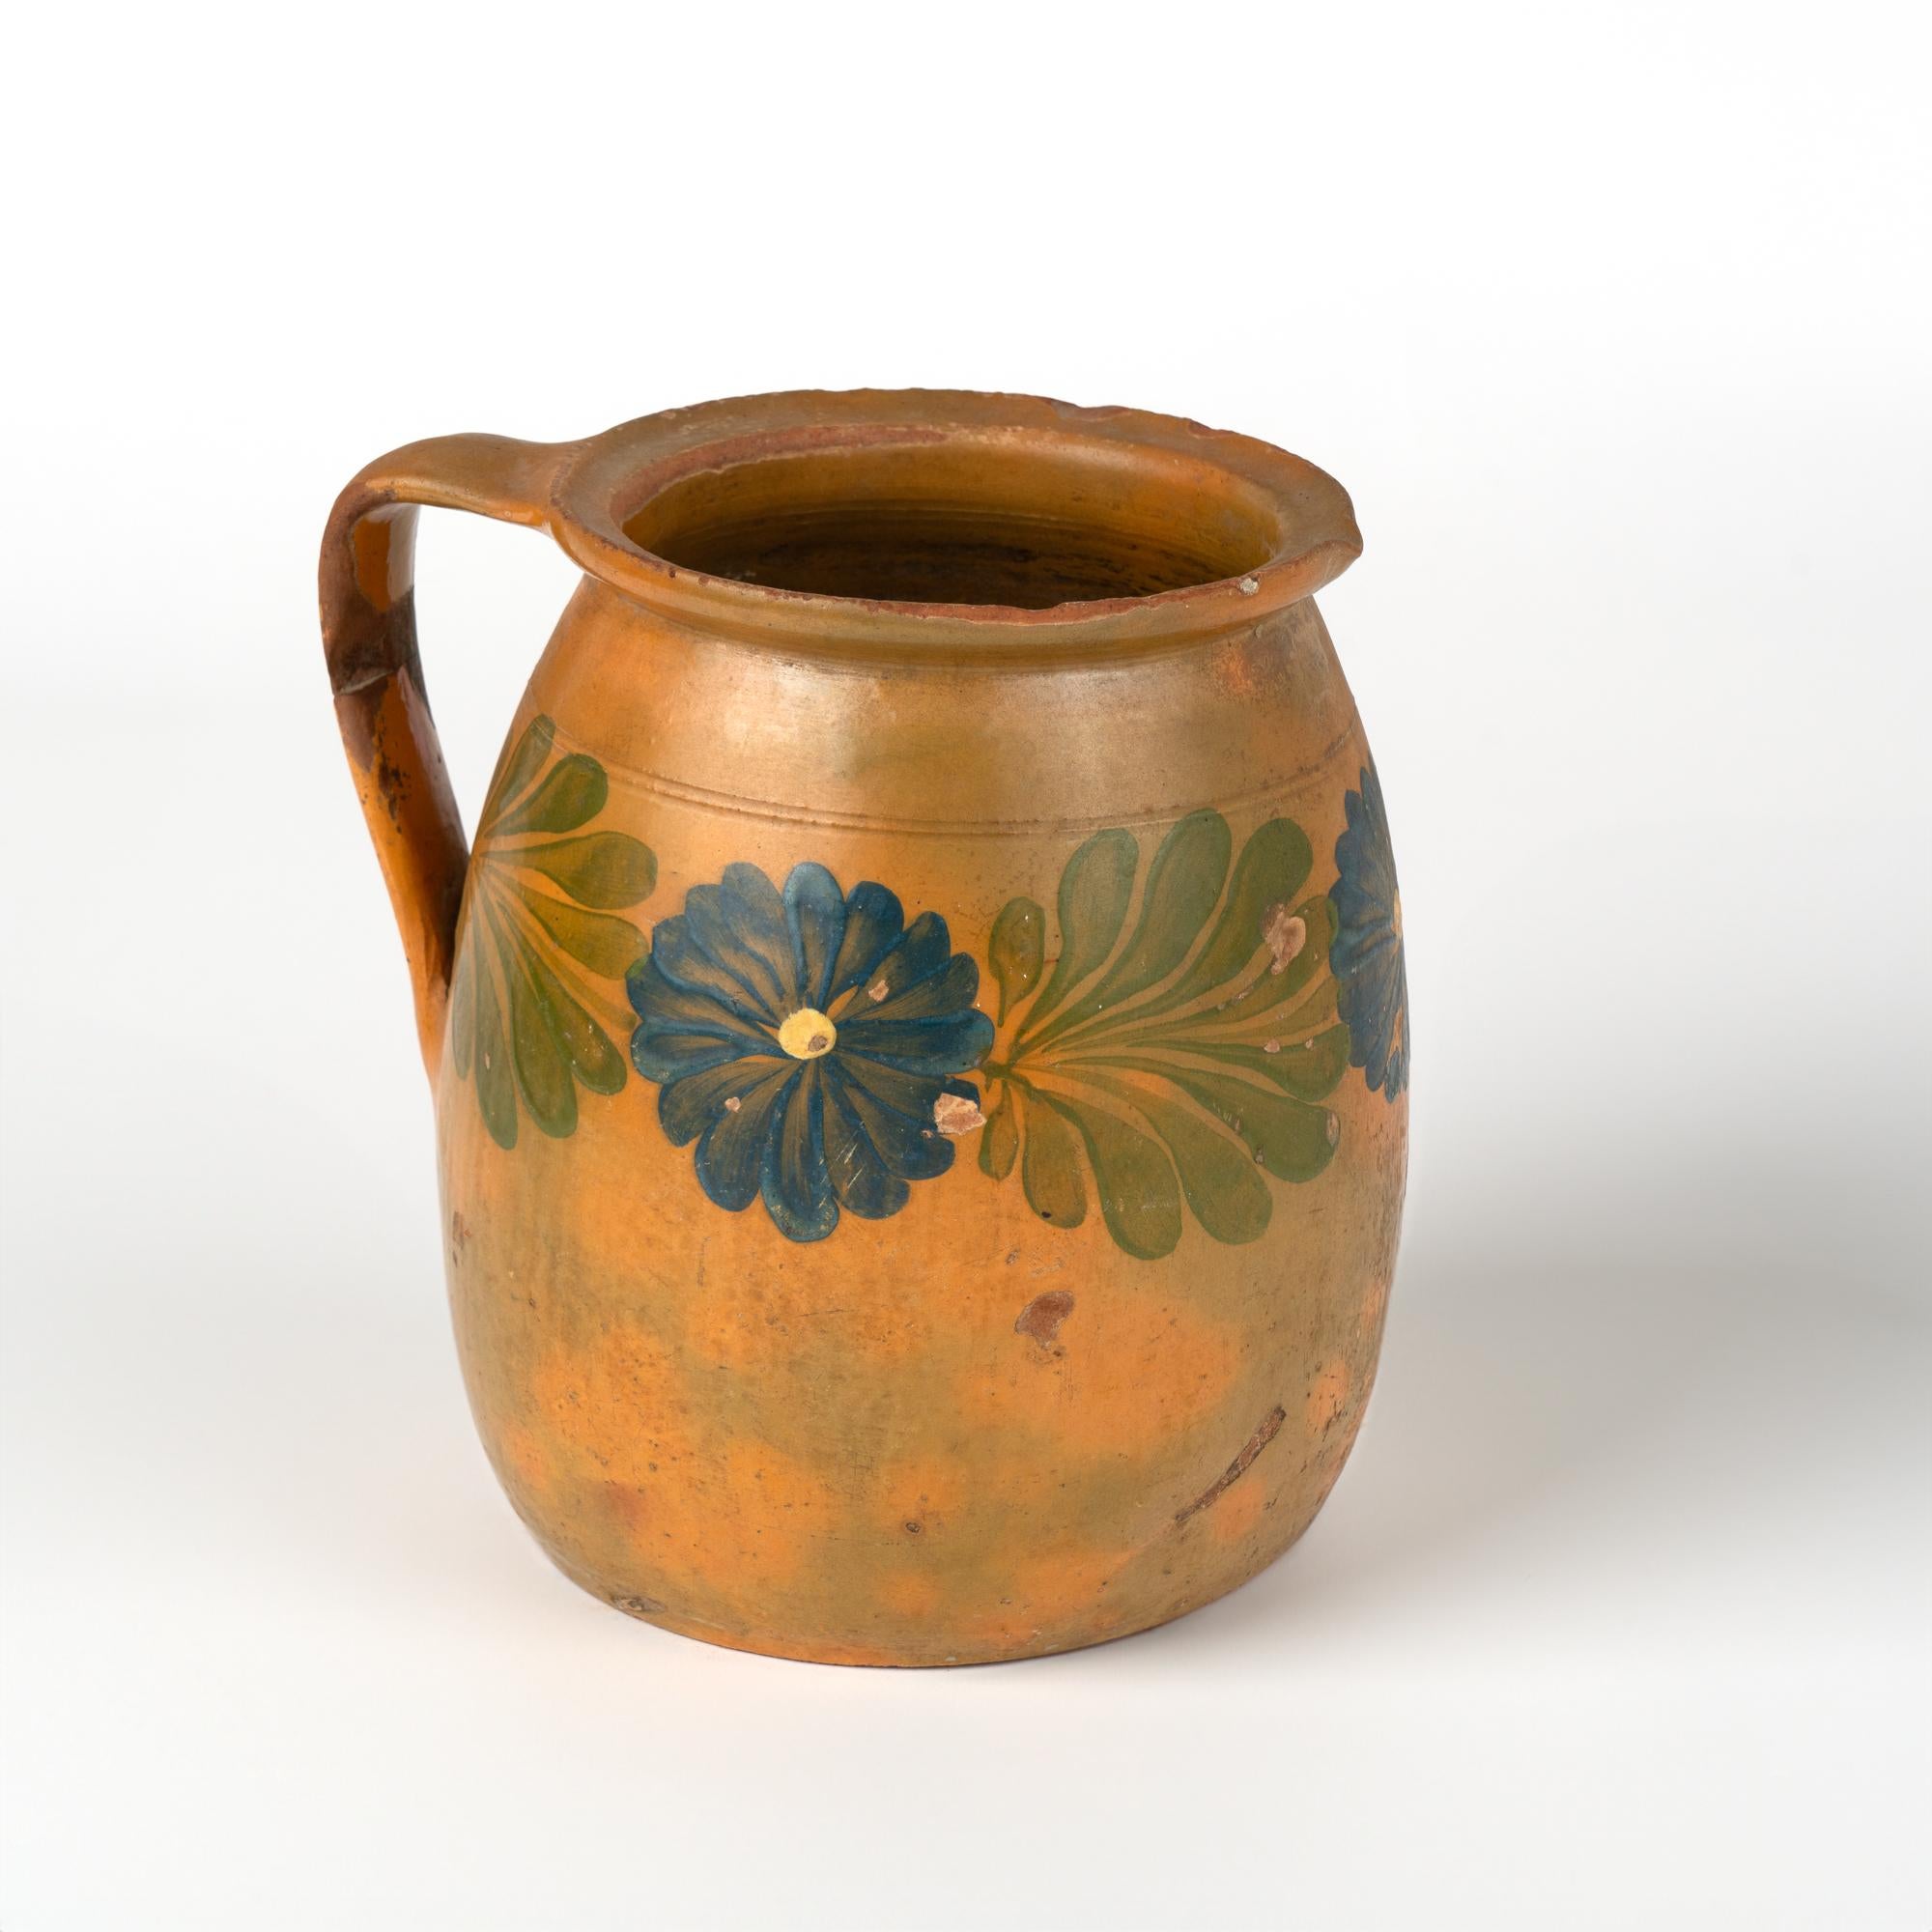 Original hand painted earthenware pottery with handle. Terracotta background with touches of green overlay, floral and leaf/vine pattern.
Sold in original vintage used condition. Any chips (especially along rim), cracks(see old repair to handle),